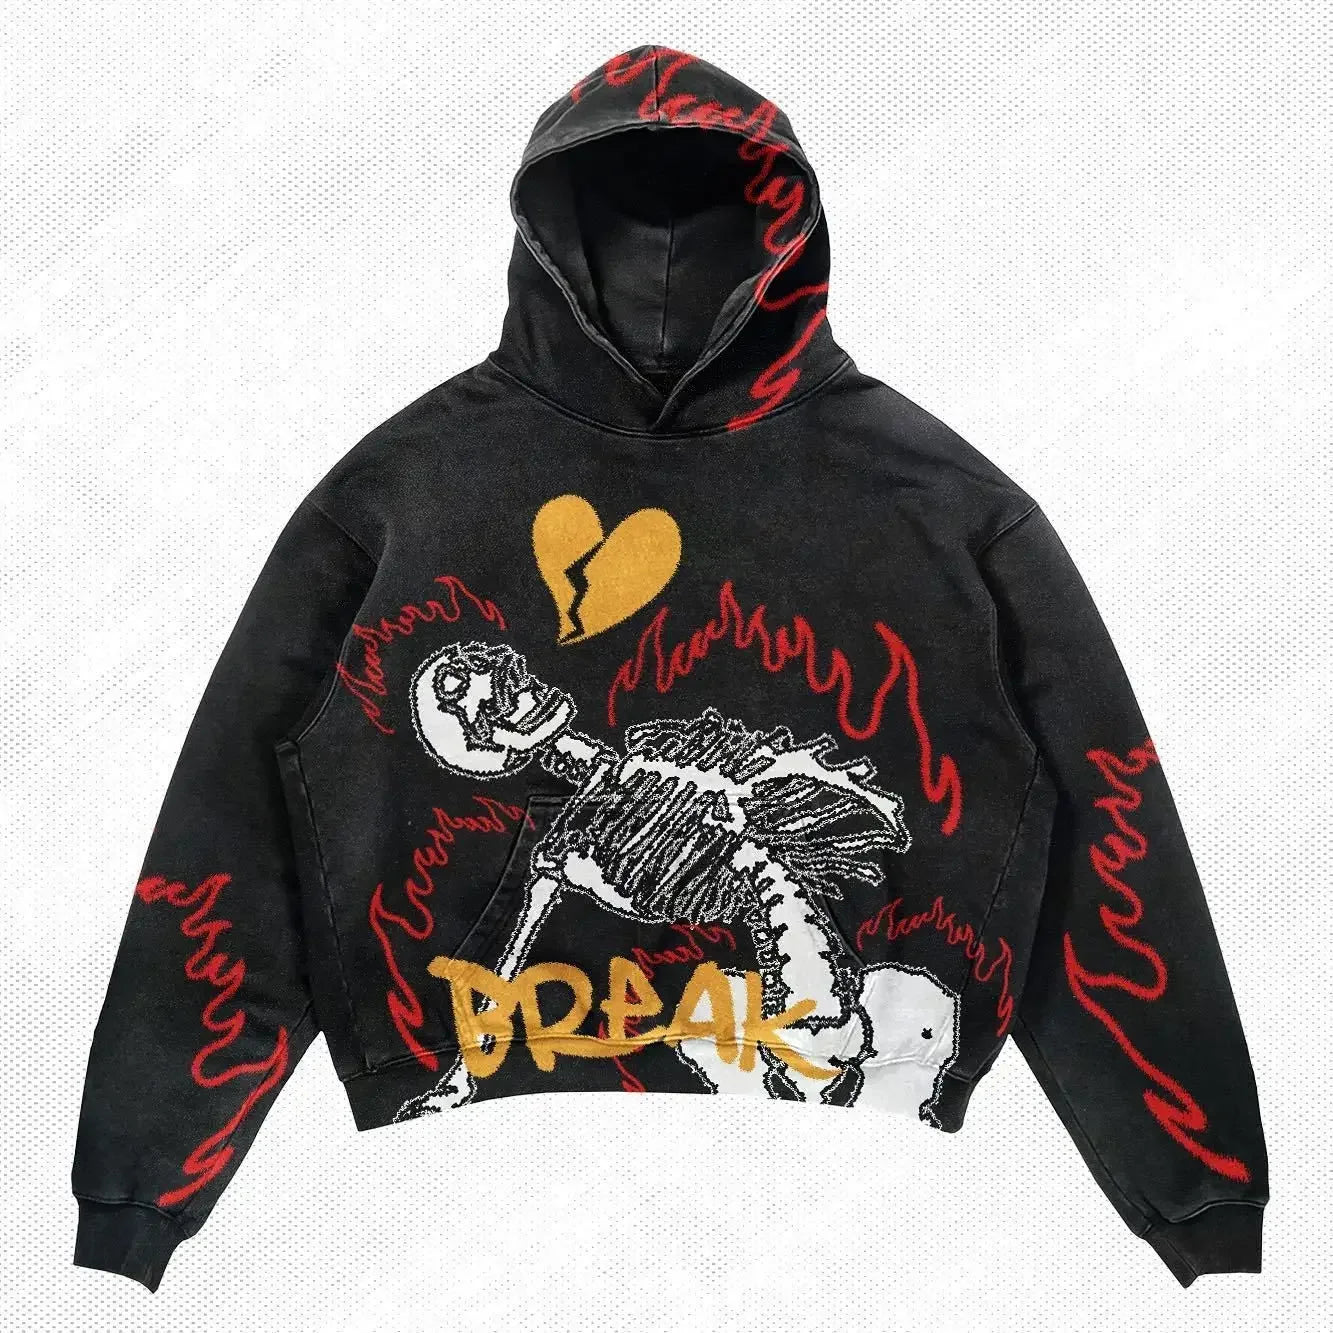 A black Maramalive™ Explosions Printed Skull Y2K Retro Hooded Sweater Coat Street Style Gothic Casual Fashion Hooded Sweater Men's Female featuring a skeletal design with flames and text, perfect for men's fashion with a punk style twist. The design includes a broken heart graphic and the word "BREAK" in yellow at the bottom. Red flame patterns embellish the sleeves and hood.